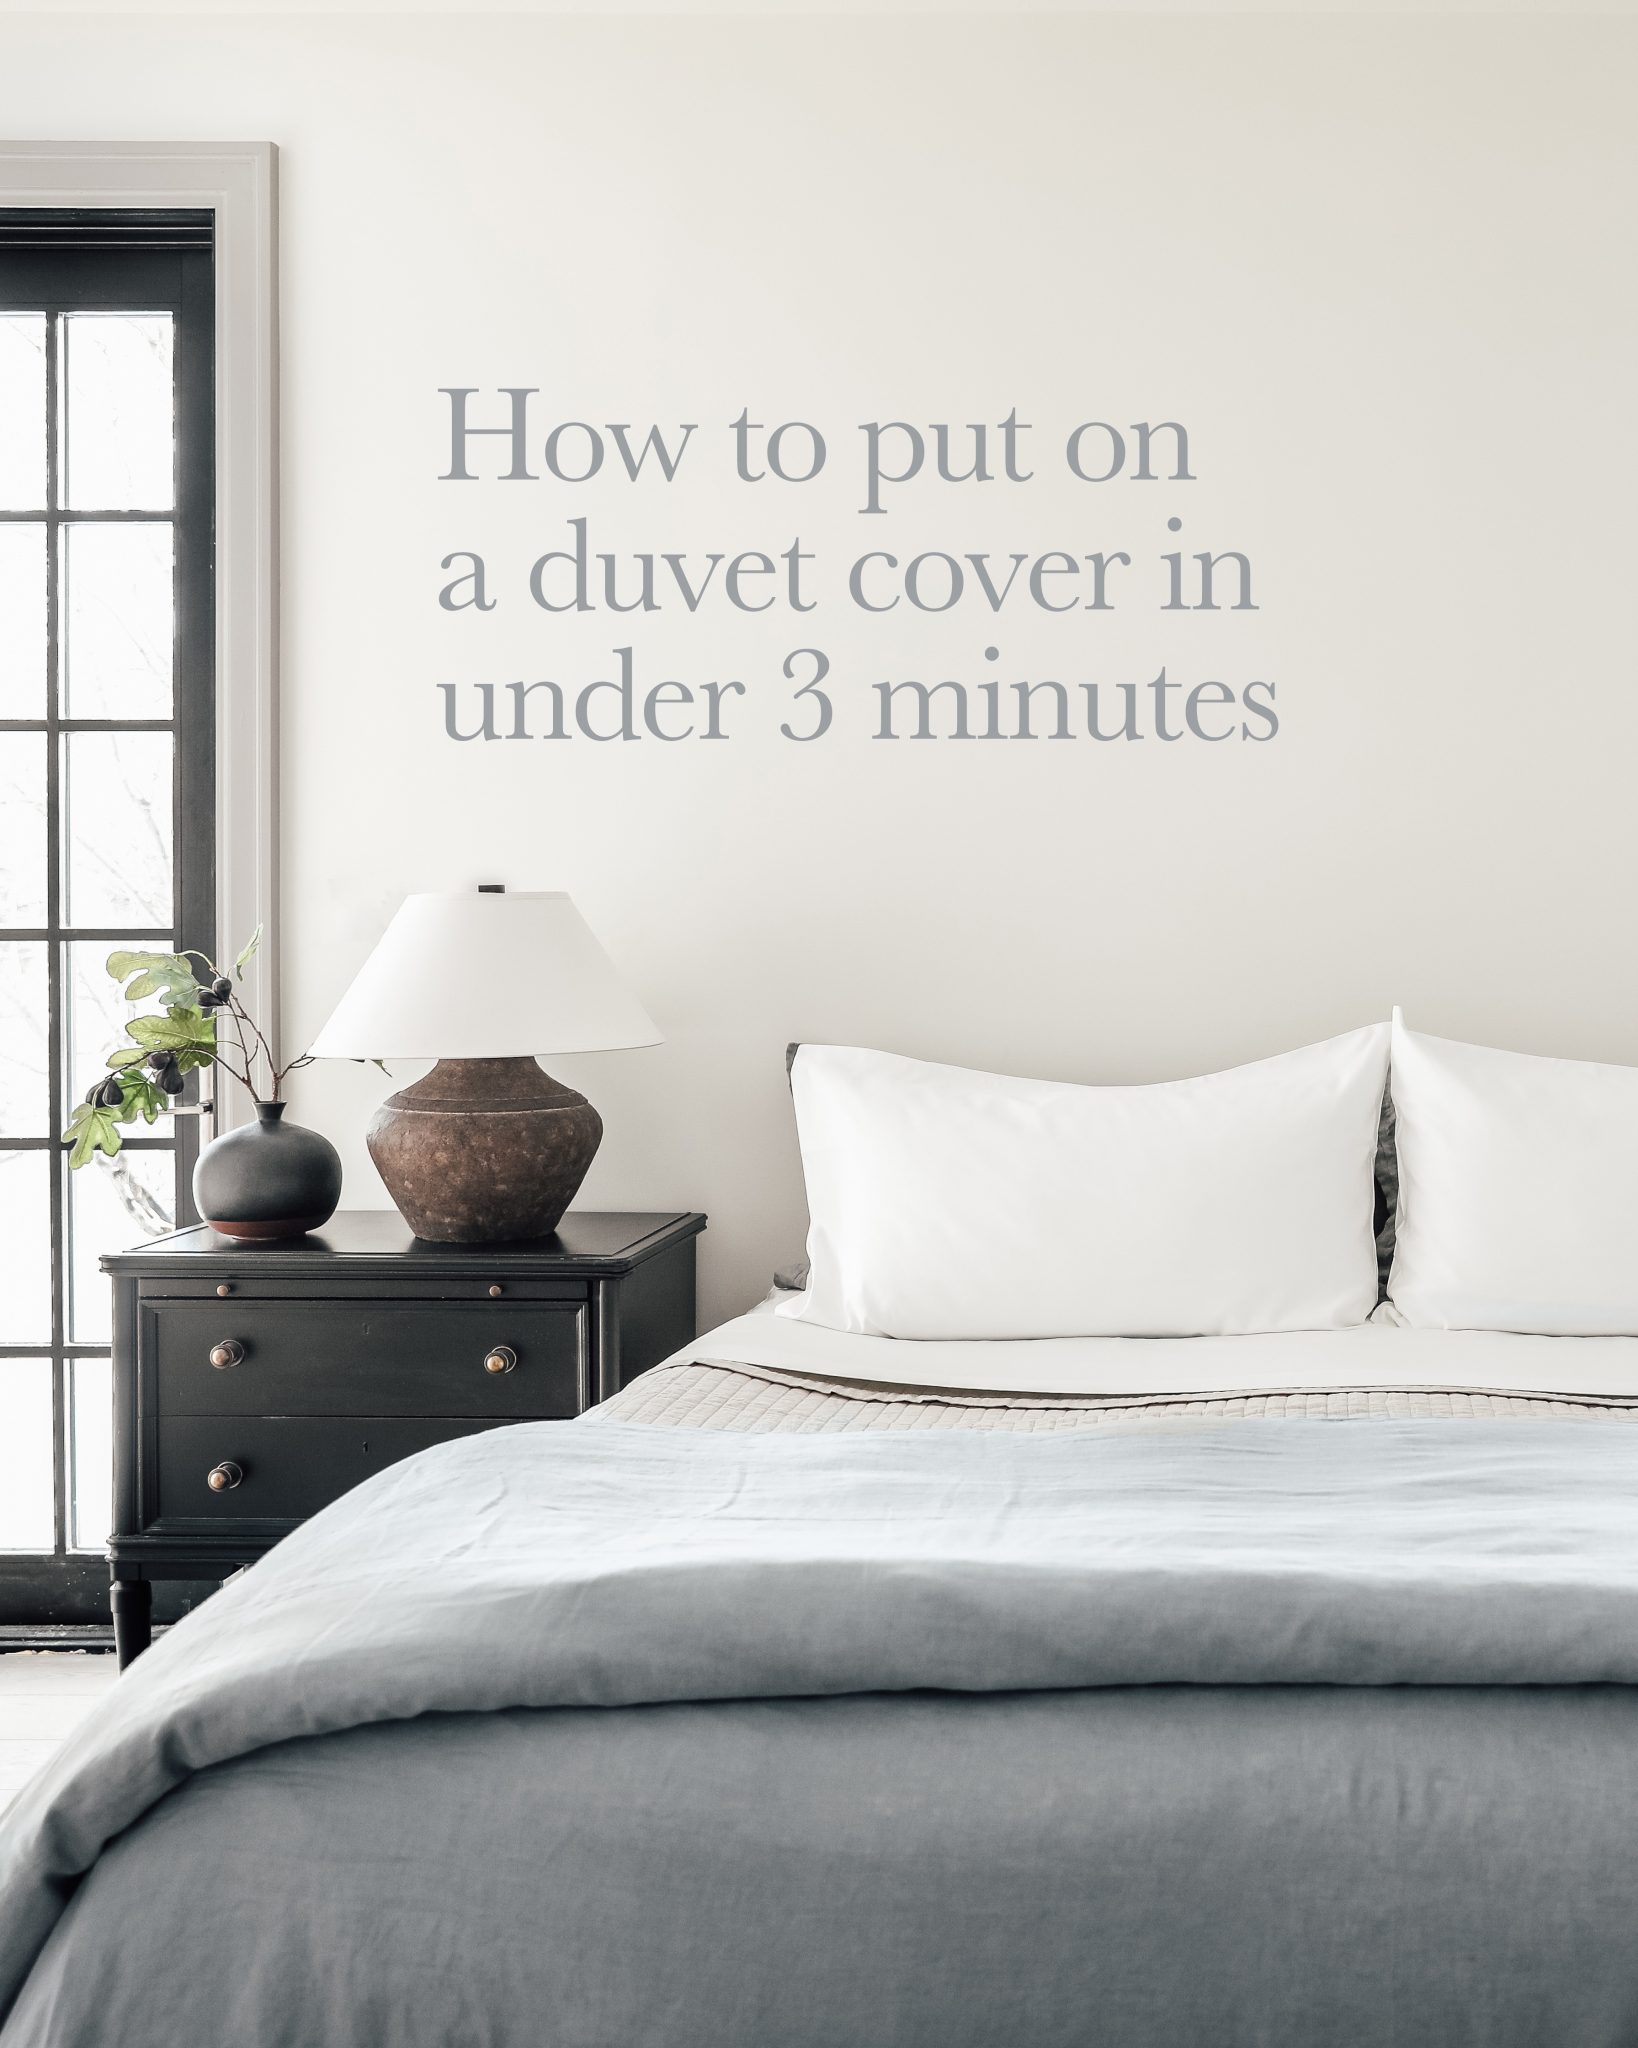 How To Put On A Duvet Cover In Under 3, Long Zippers For Duvet Covers